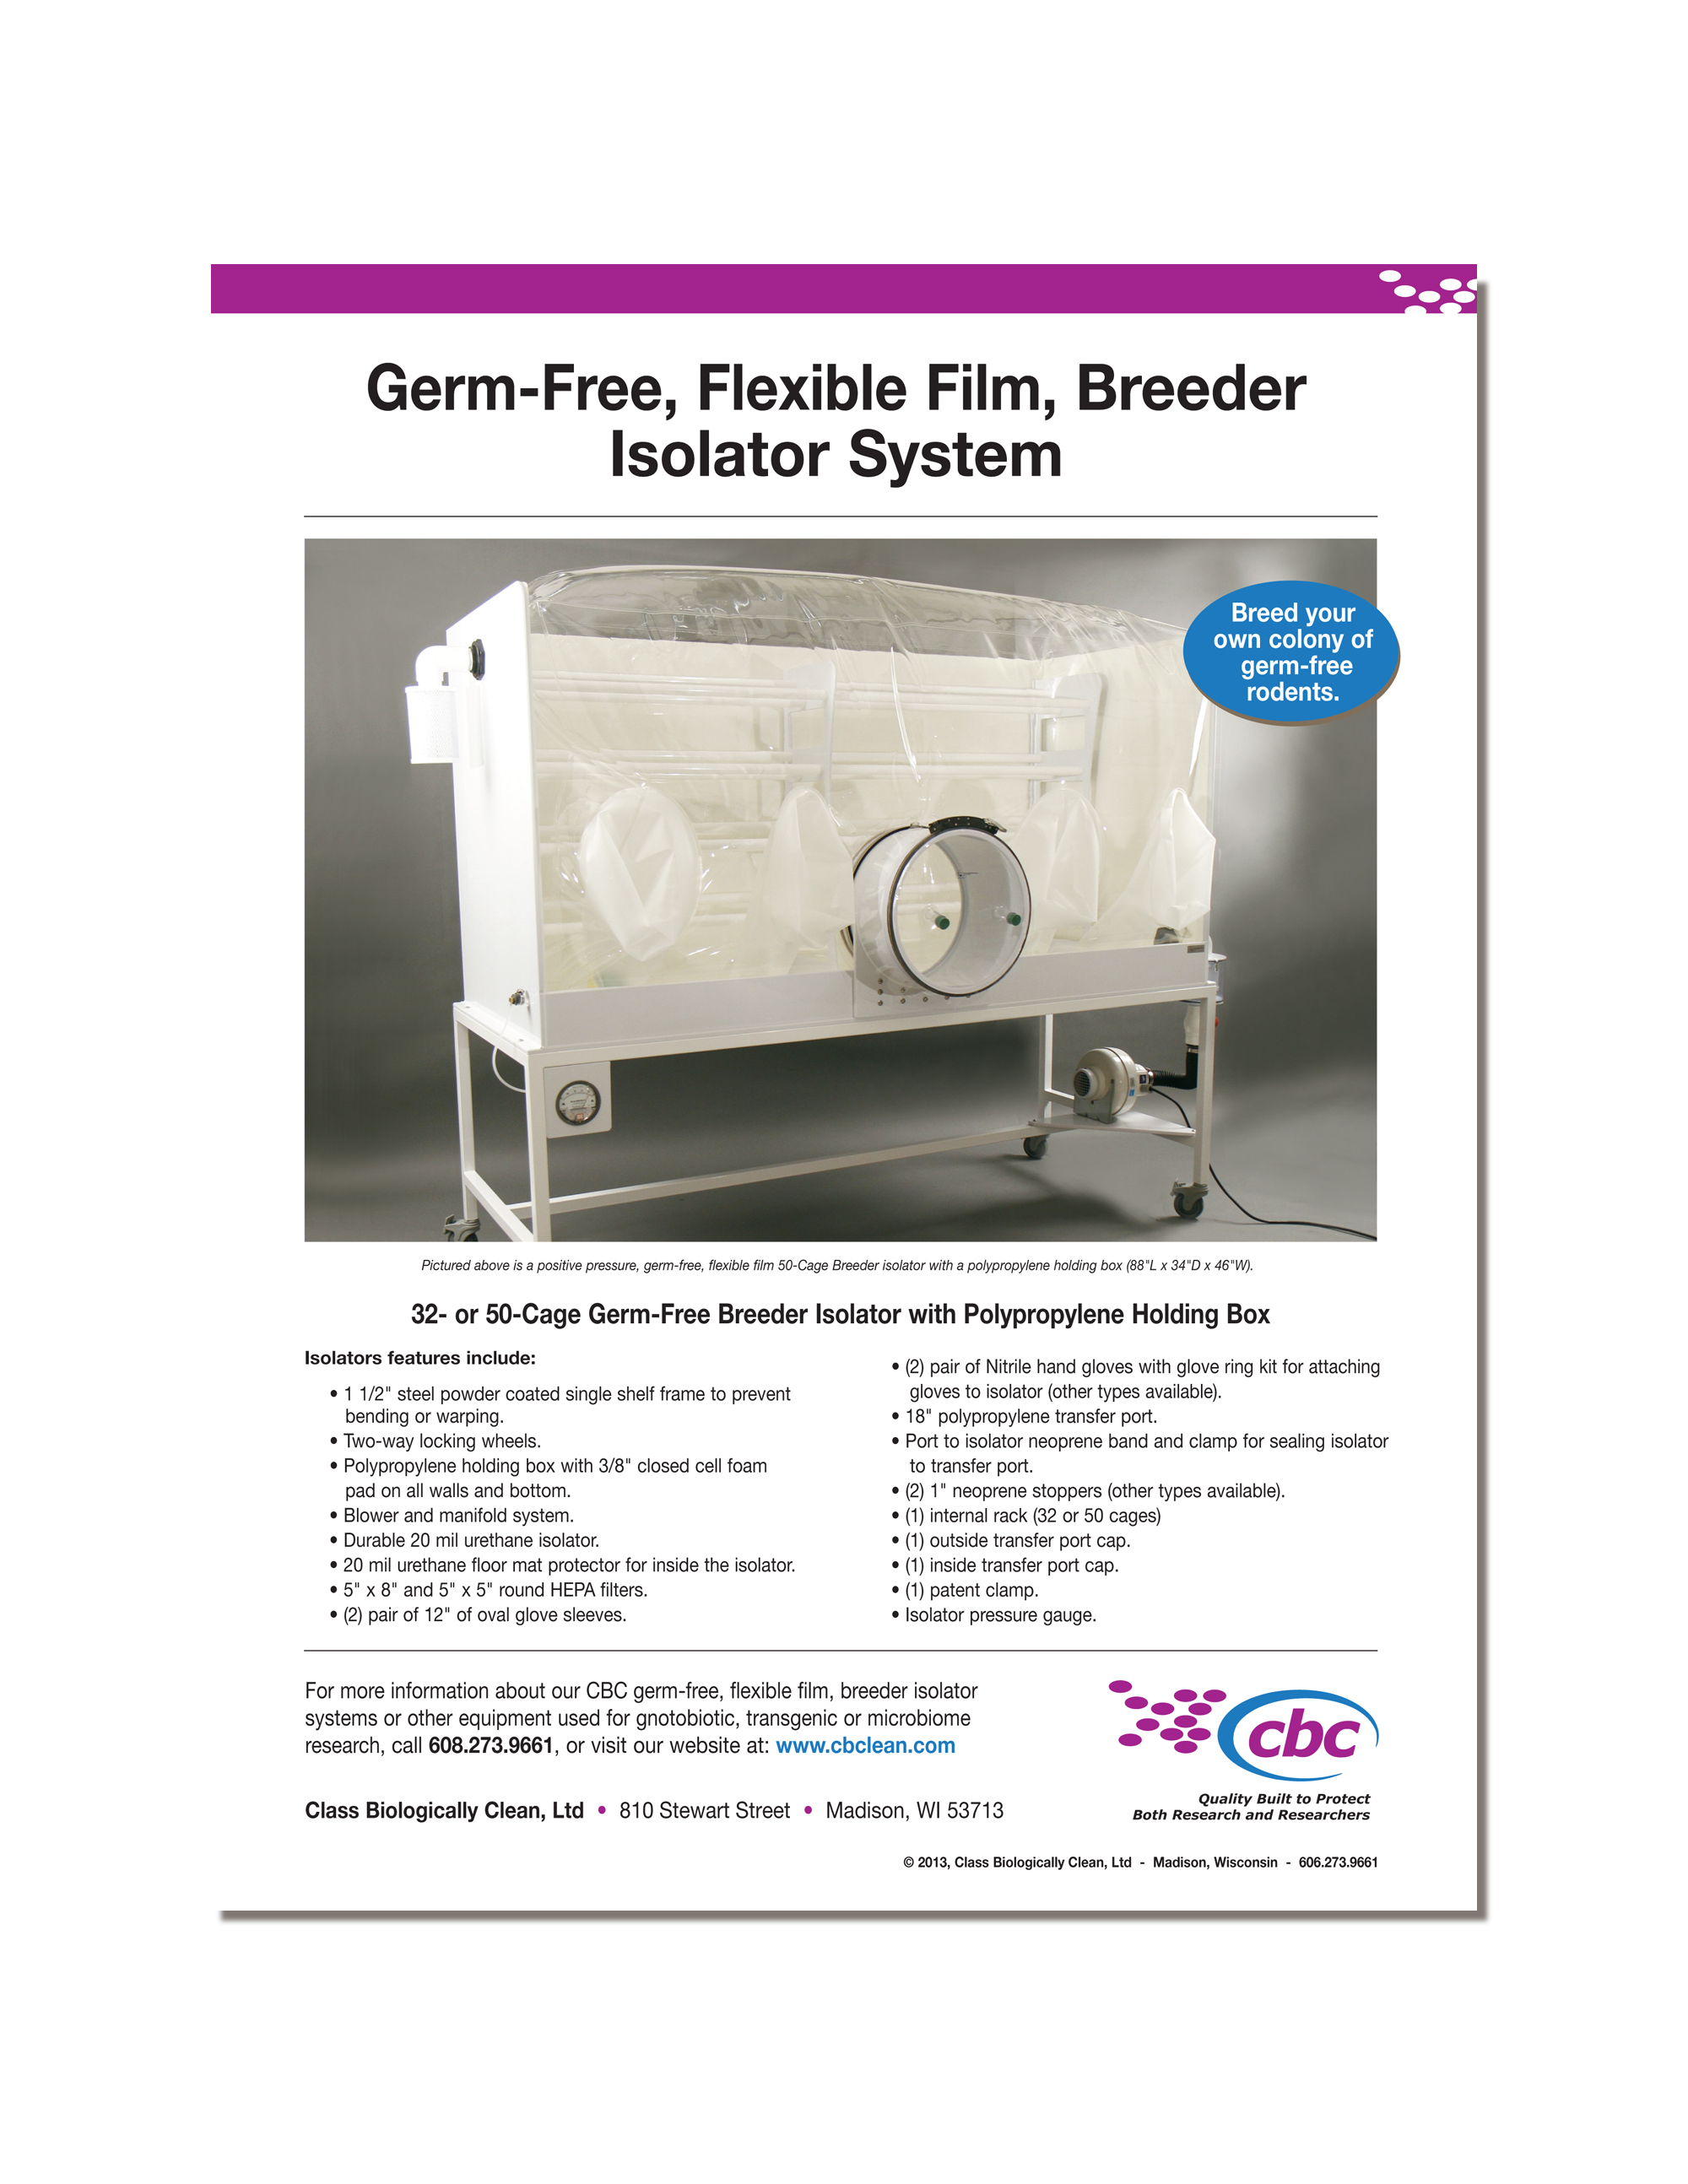 CBC breeder isolator systems come with all the components and accessories to establish a fully functional germ-free, gnotobiotic lab that offers complete environmental control for gnotobiotic, microbiome and other research using mice or other rodents. Click here to download flyer.